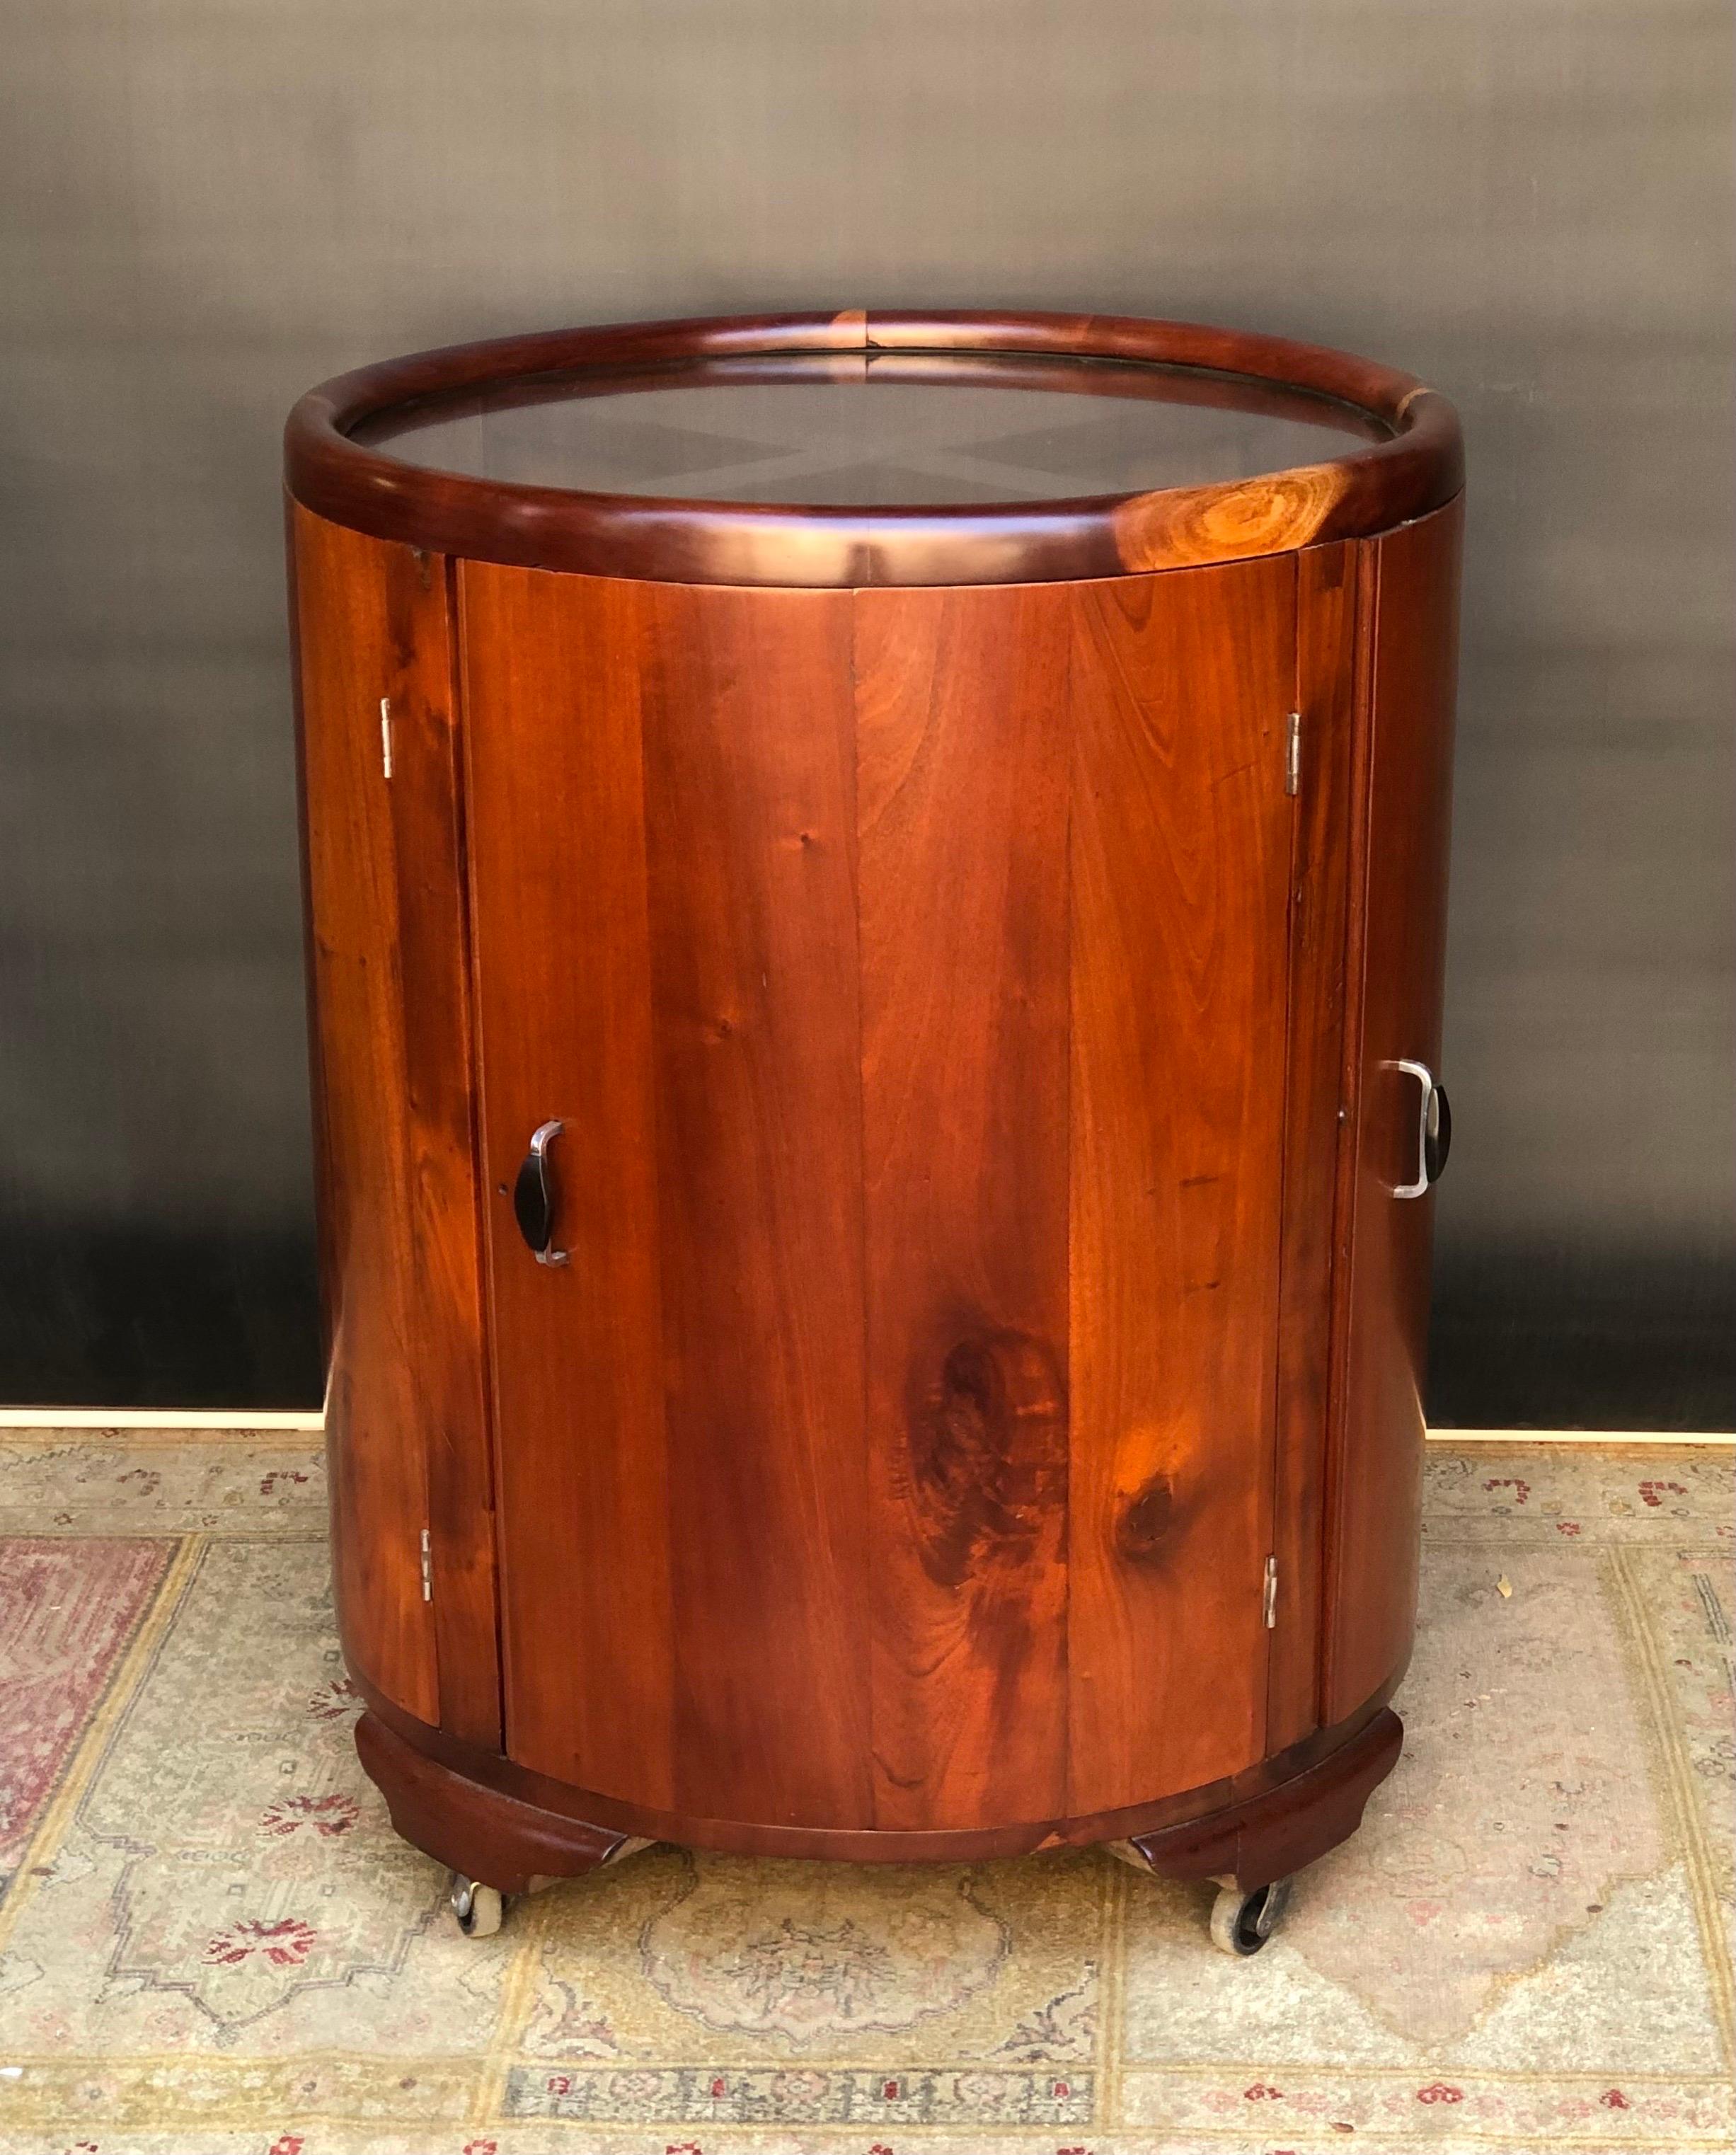 This Rare Jamaican Art Deco. Round, Four Door Mahogany Bar / Cocktail Cabinet was designed and handmade by Burnett Webster (1909–1992) in Kingston, Jamaica. The Jamaican Art Deco Cocktail Cabinet is constructed using spectacularly figured solid